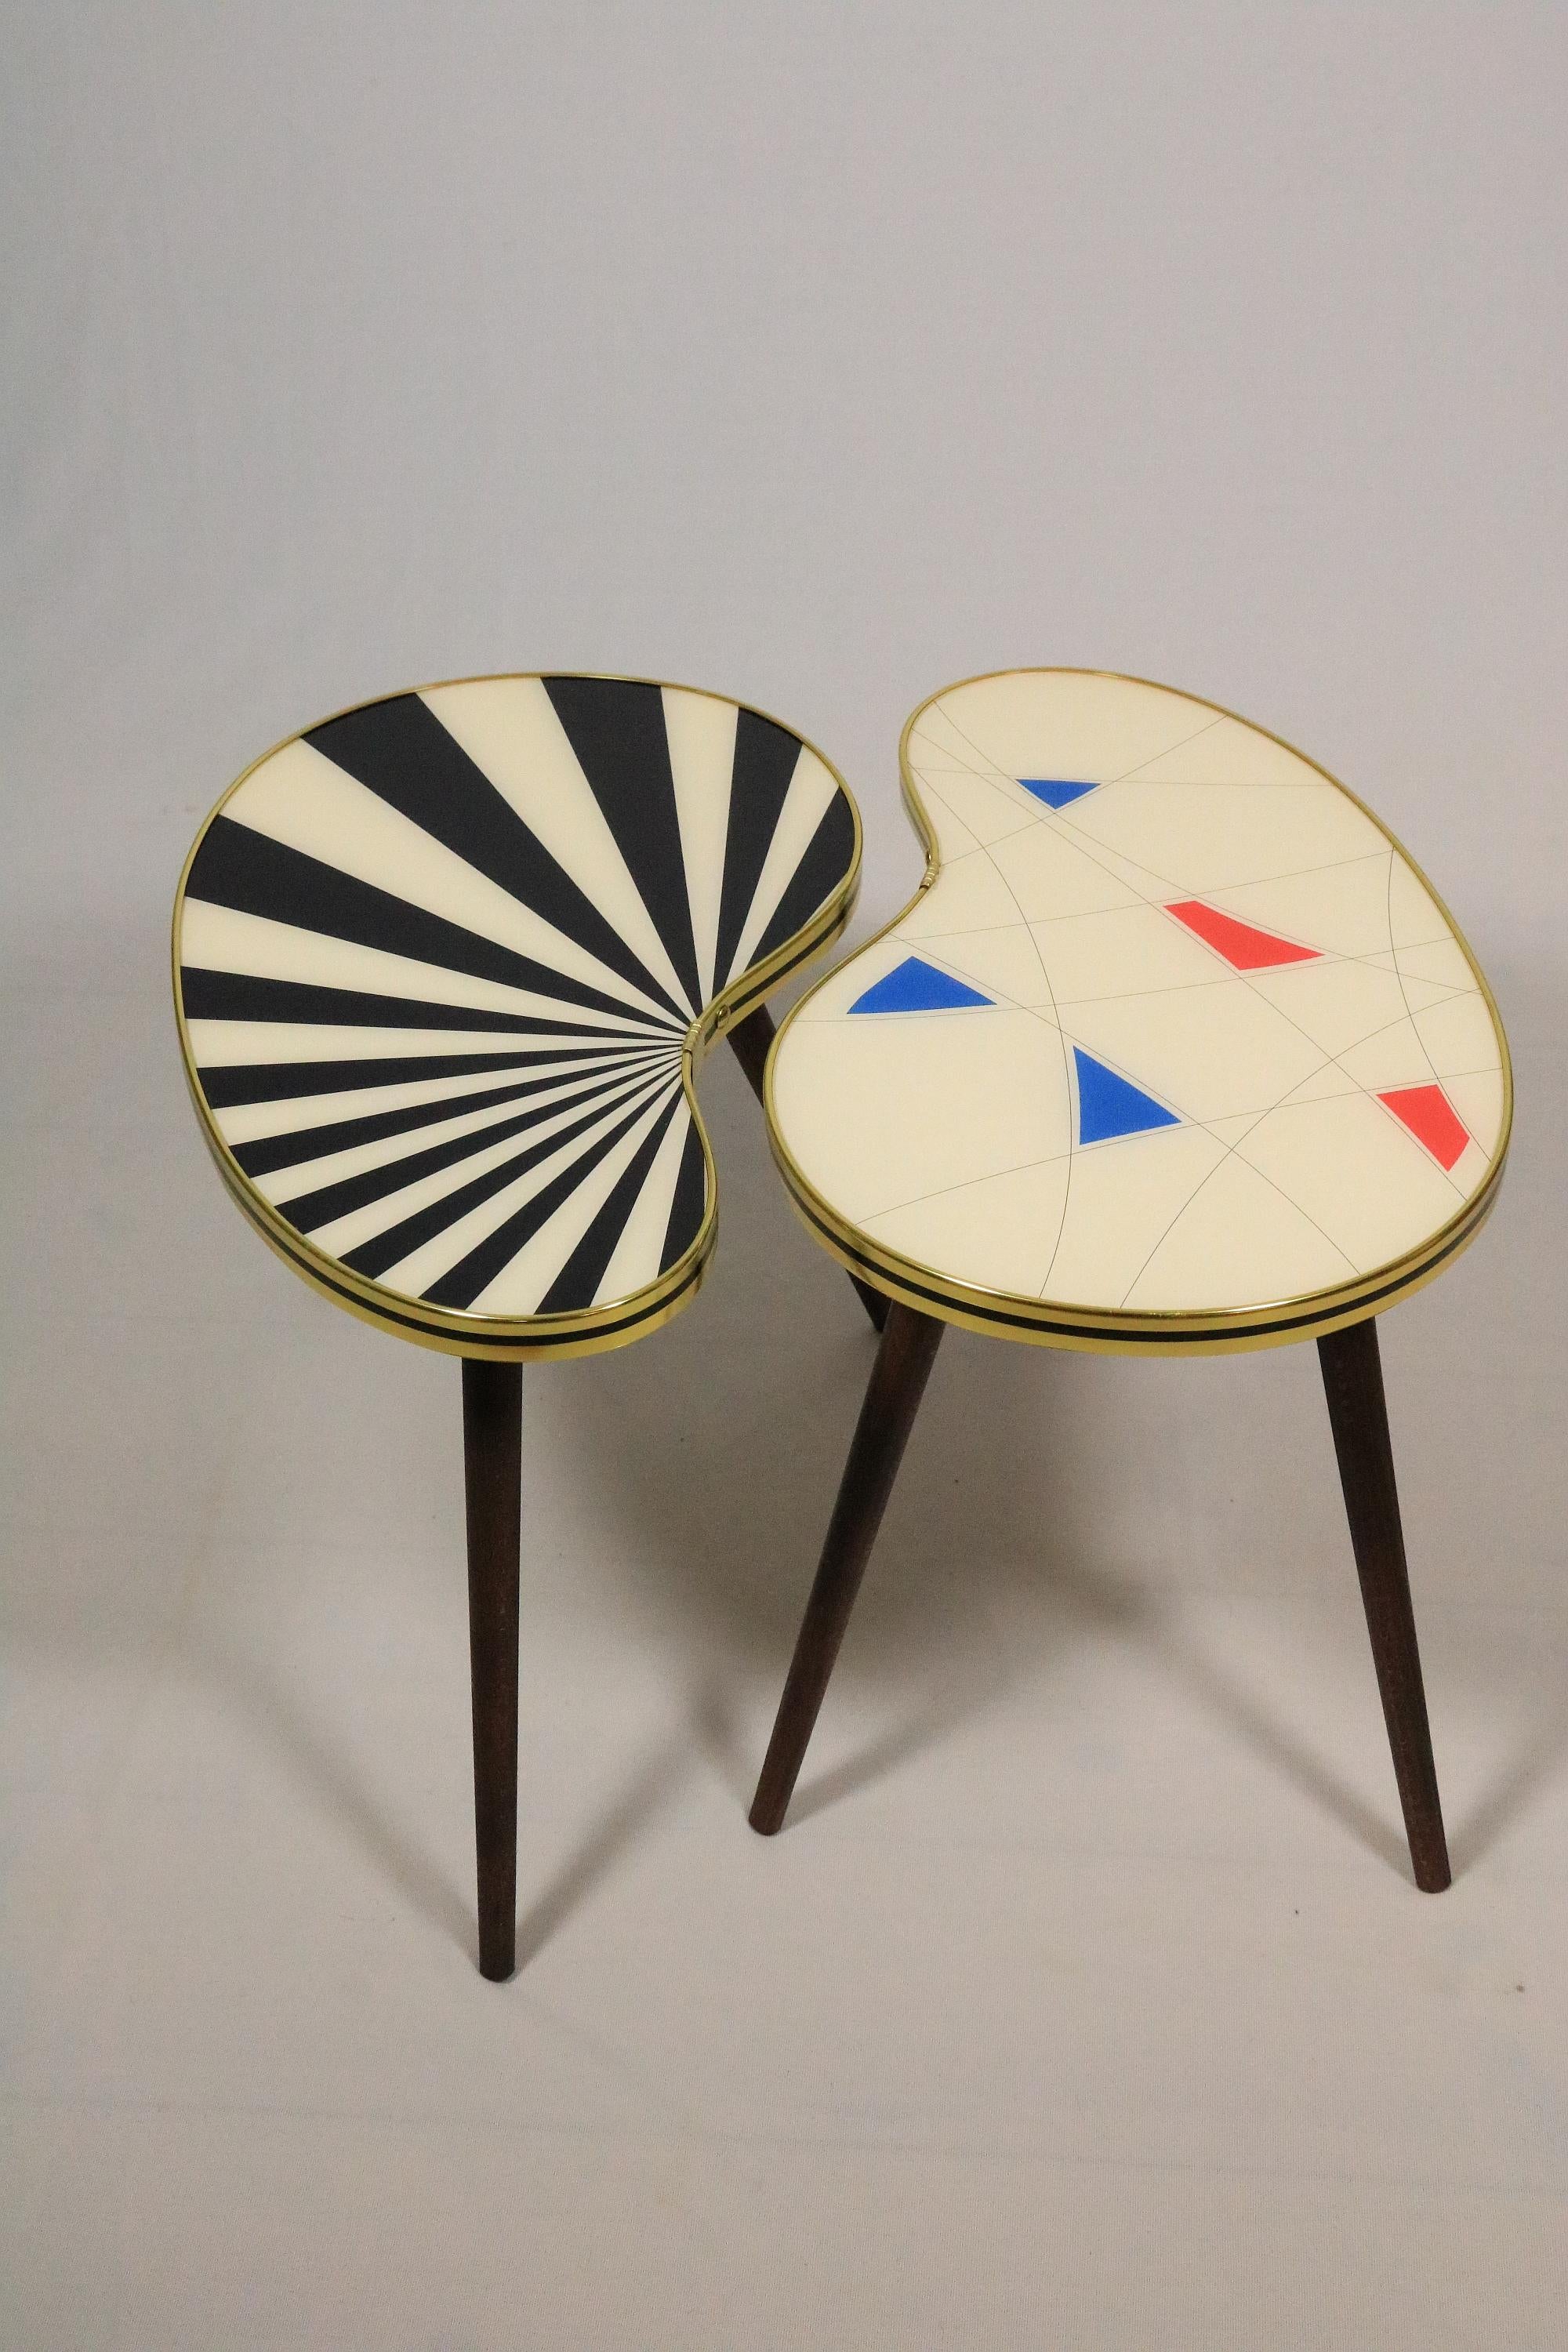 Hand-Crafted Side Table, Kidney Shaped, Geometric Pattern, Three Elegant Legs, 50s Style For Sale